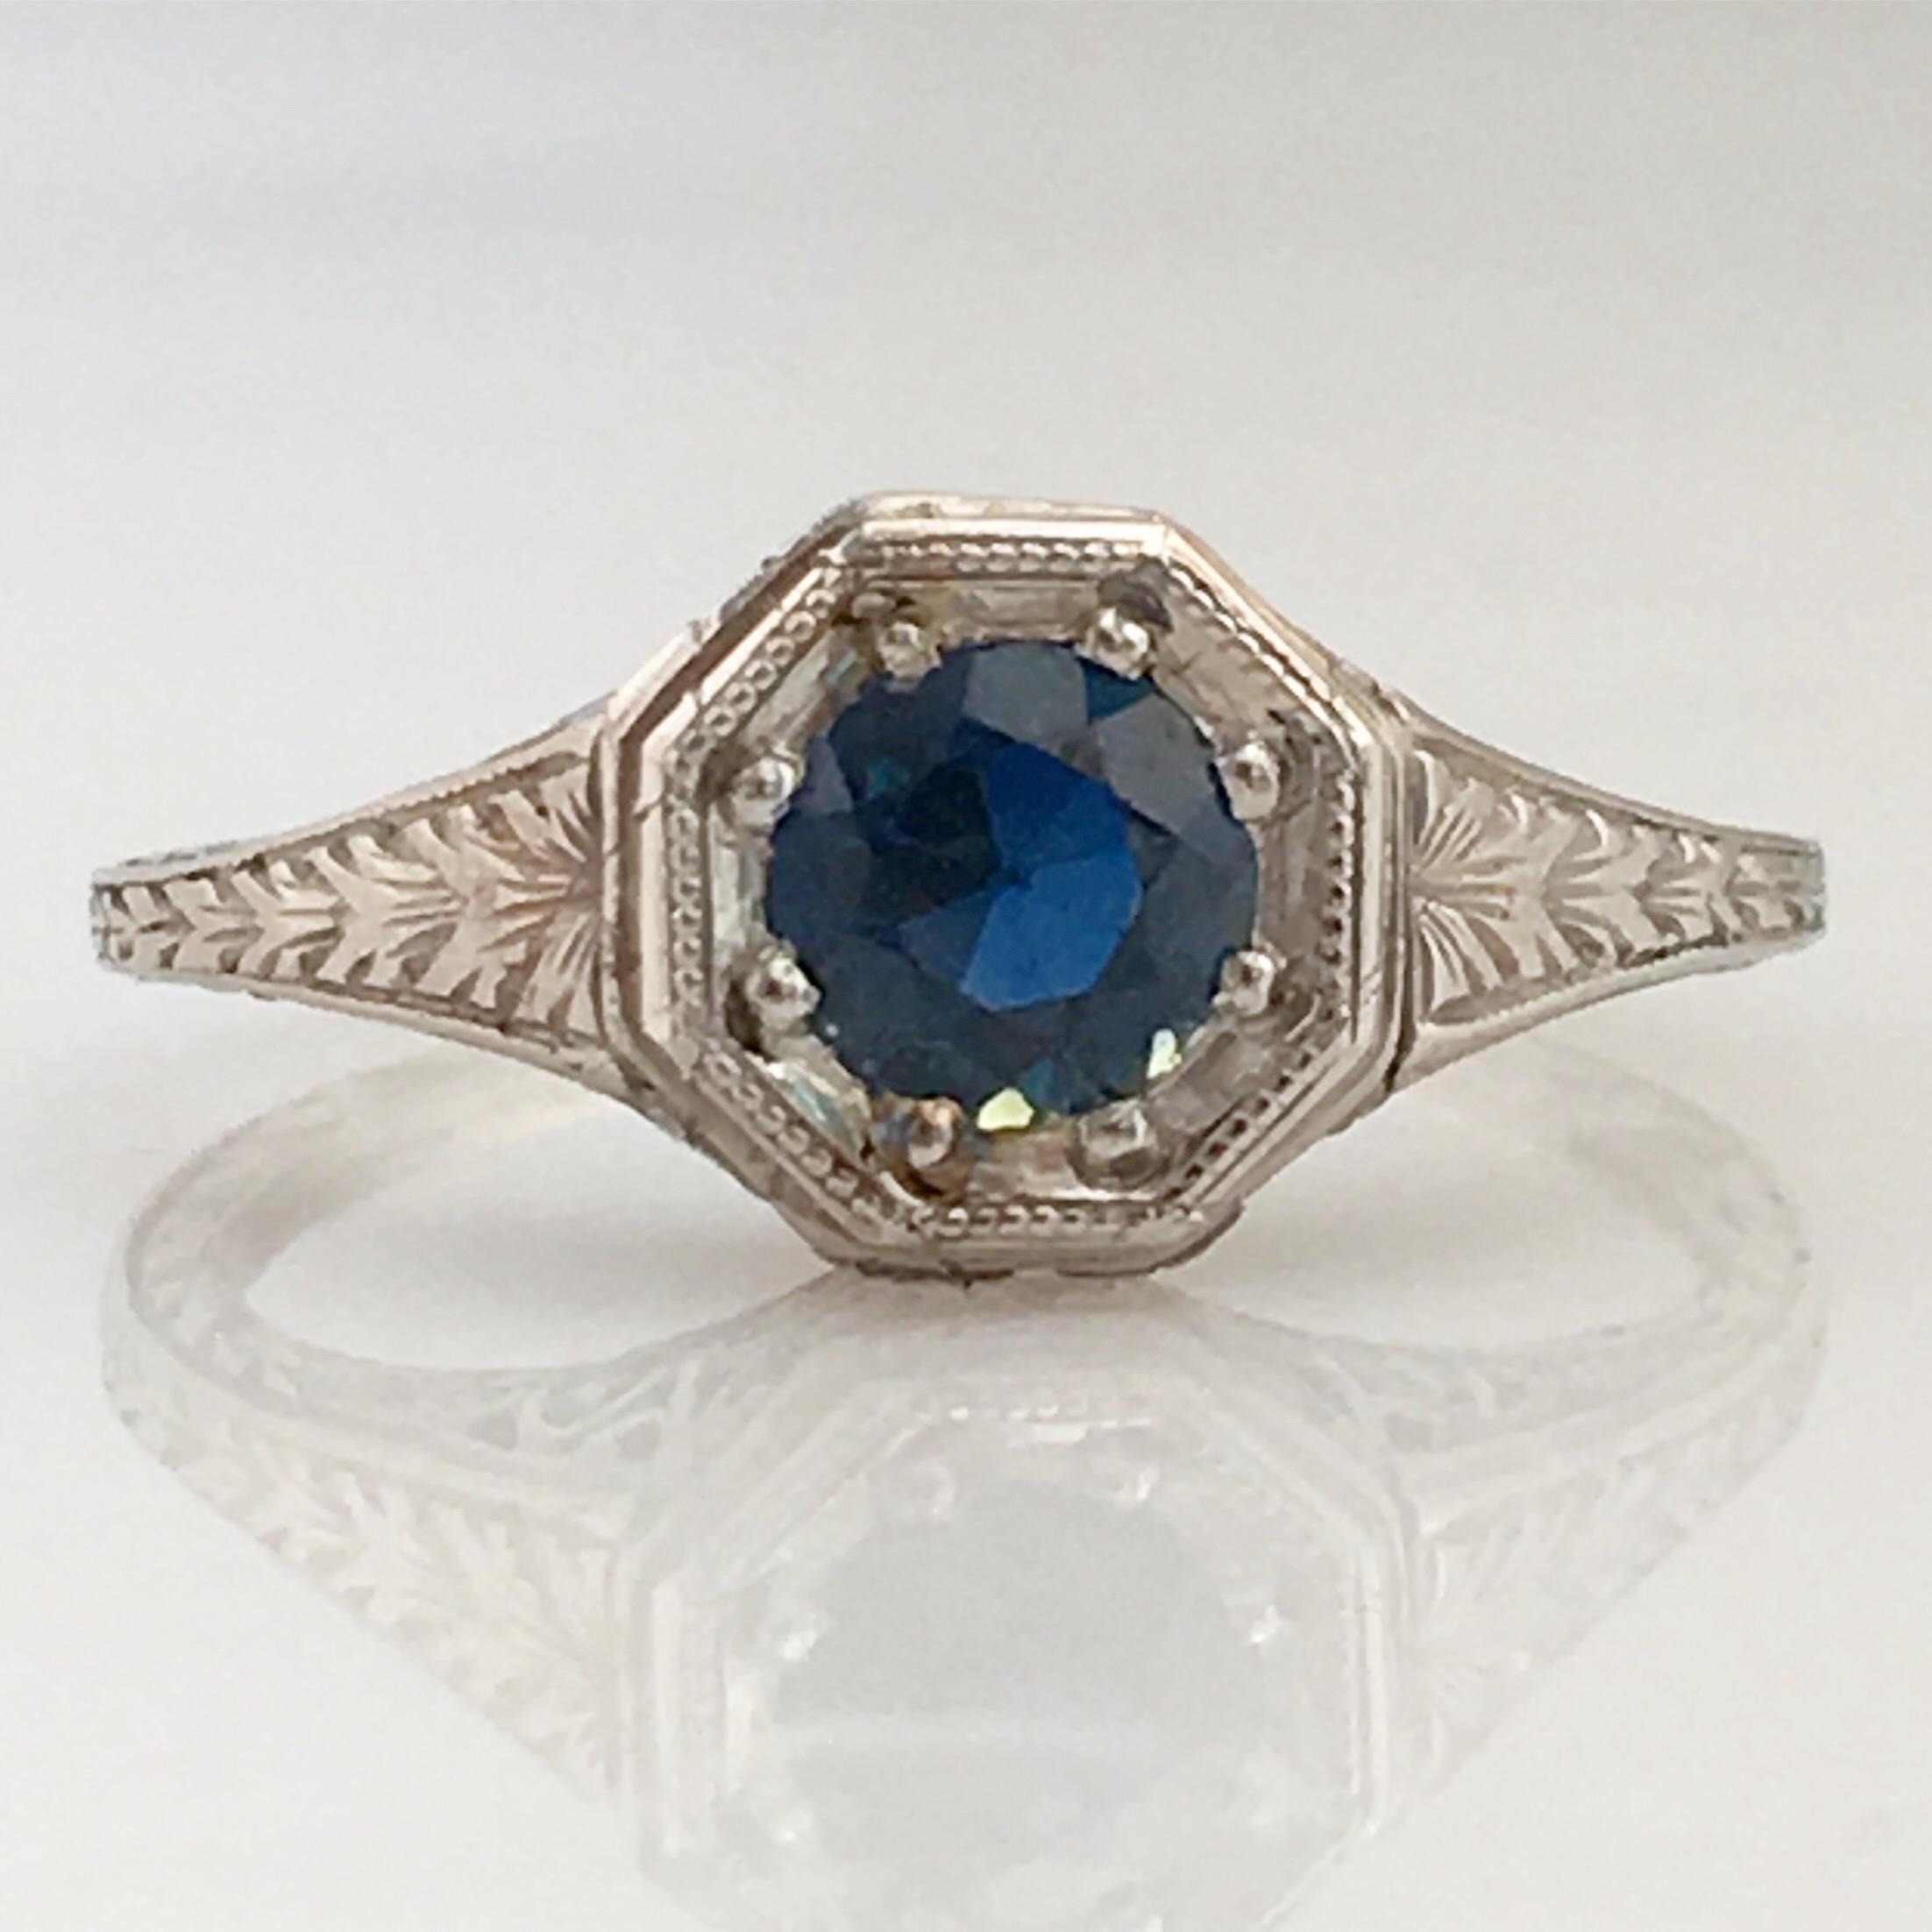 Details:
Stunning Art Deco Period platinum and sapphire ring—would make a lovely wedding ring! The center stone is estimated .40 carats, and measures 4.9mm round. The filigree is beautiful on this ring, and is in lovely shape. This is a stunning